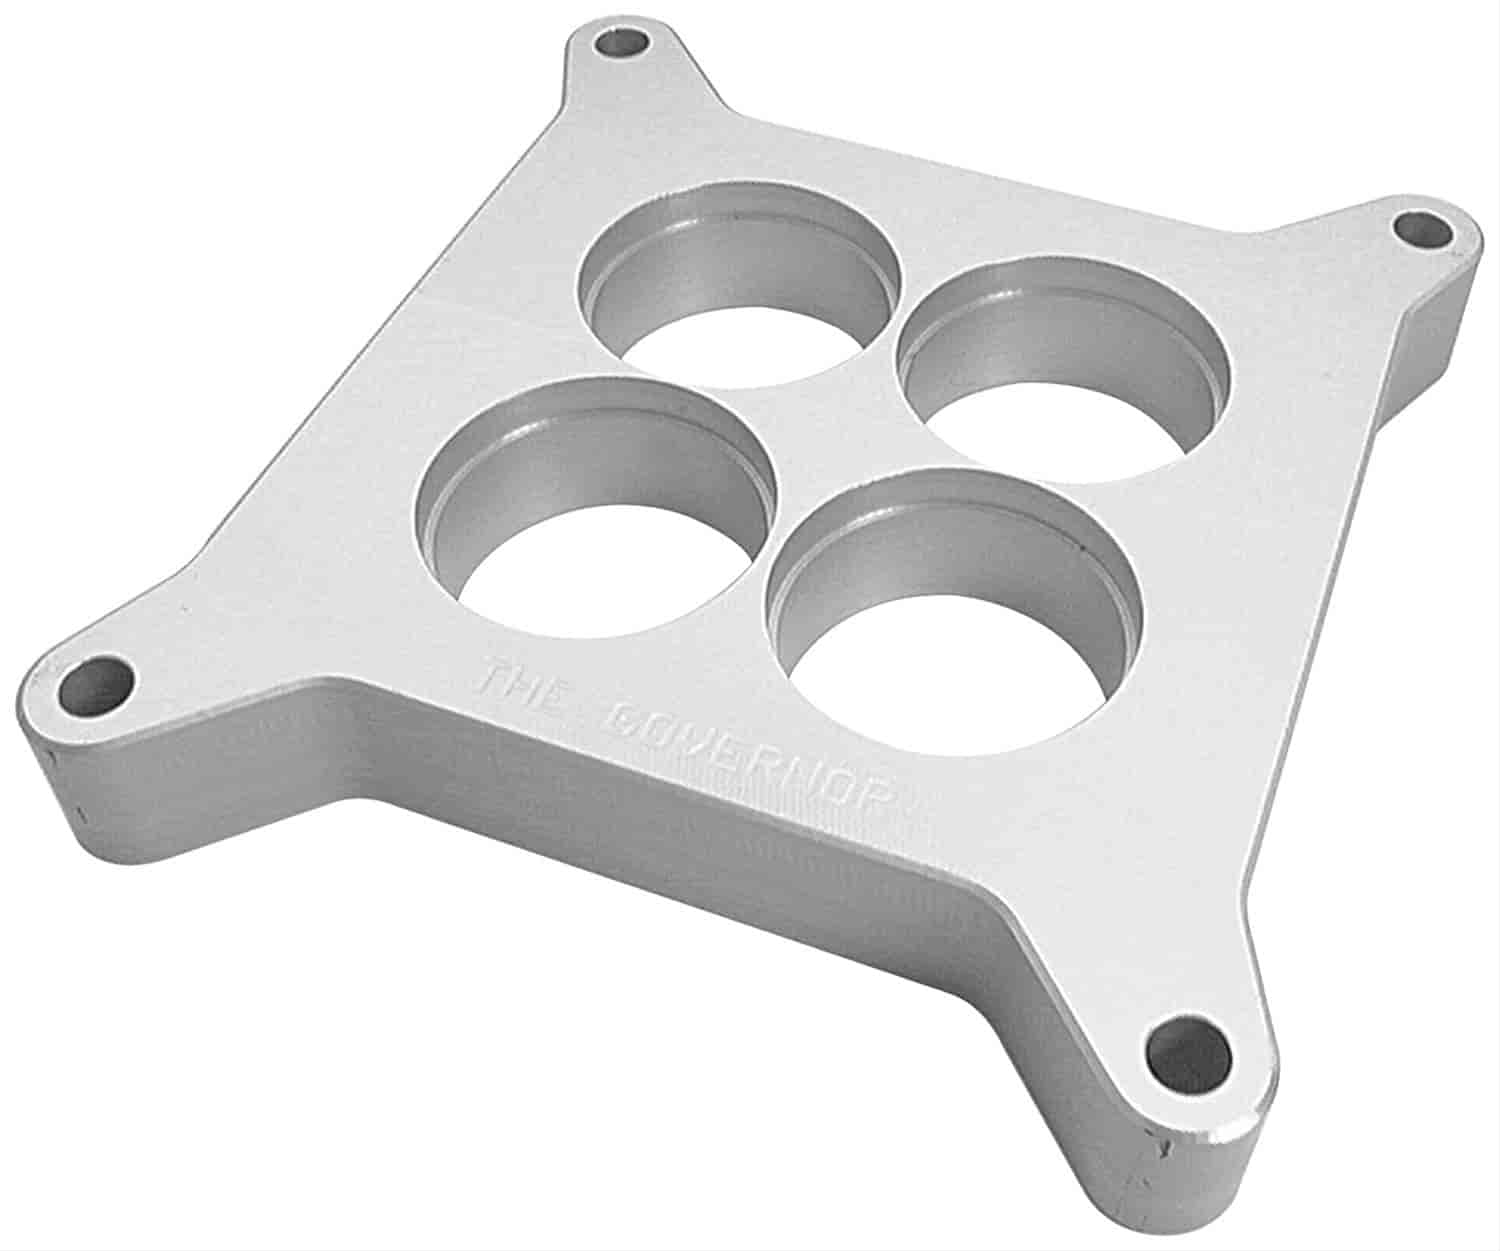 Adjustable Carb Base Plate 4-Hole 4150/4160 Series Holley Carbs